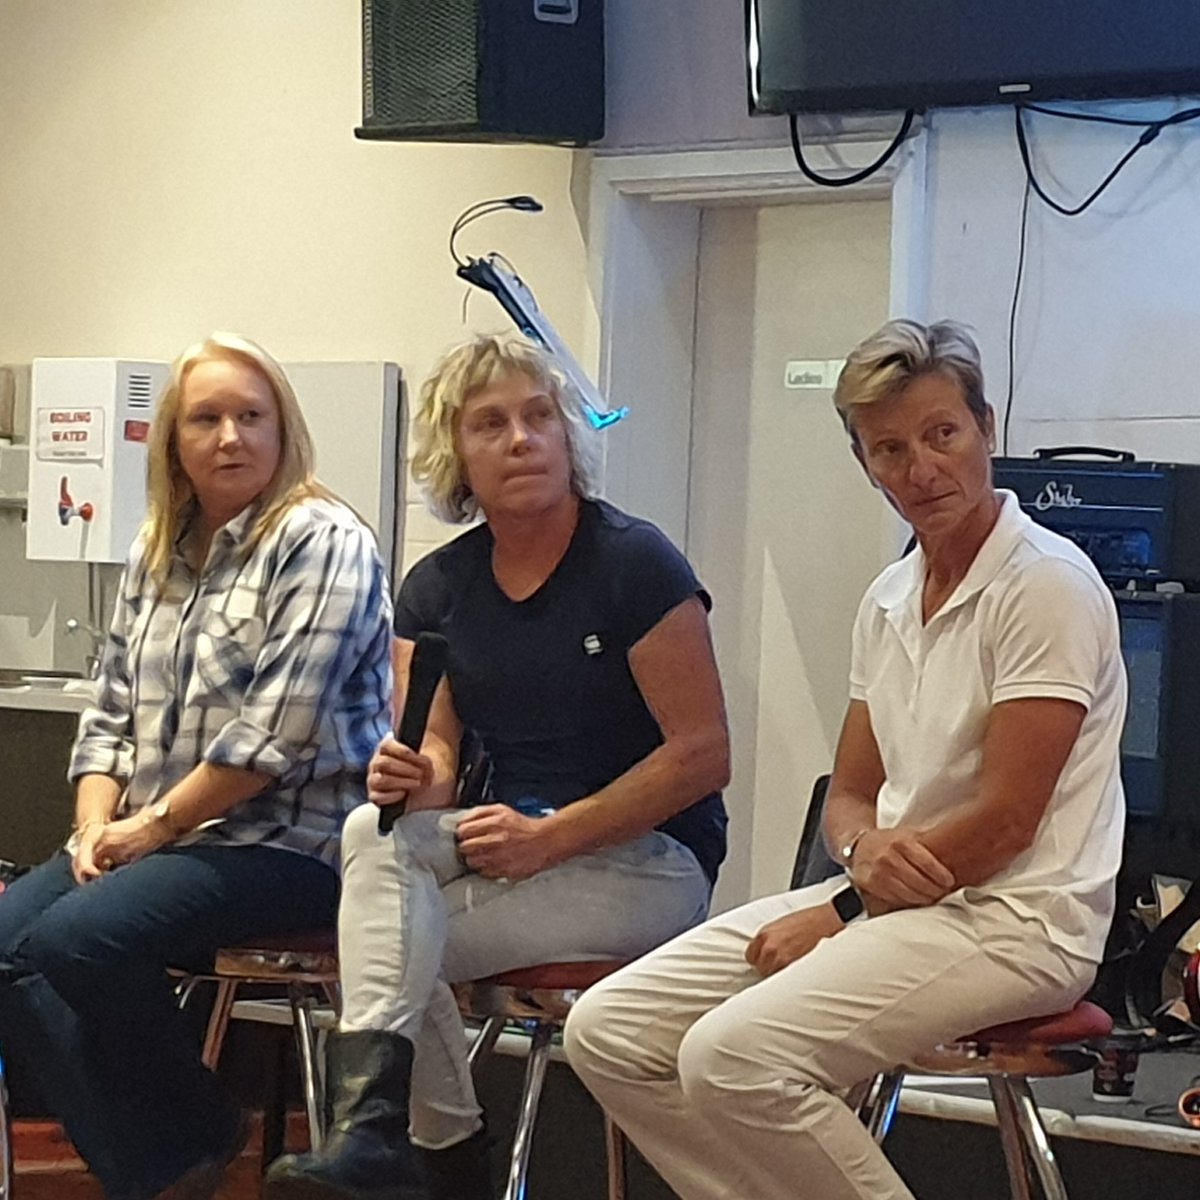 Panel discussion on the #powerofsport in rural communities and the impact of #bushfire with Australian cricket great Cathryn Fitzpatrick , Bronwyn Hutchinson andAssoc. Professor / Director of Centre for Excellence in Rural Sexual Health Jane Tomnay and @leesacatto